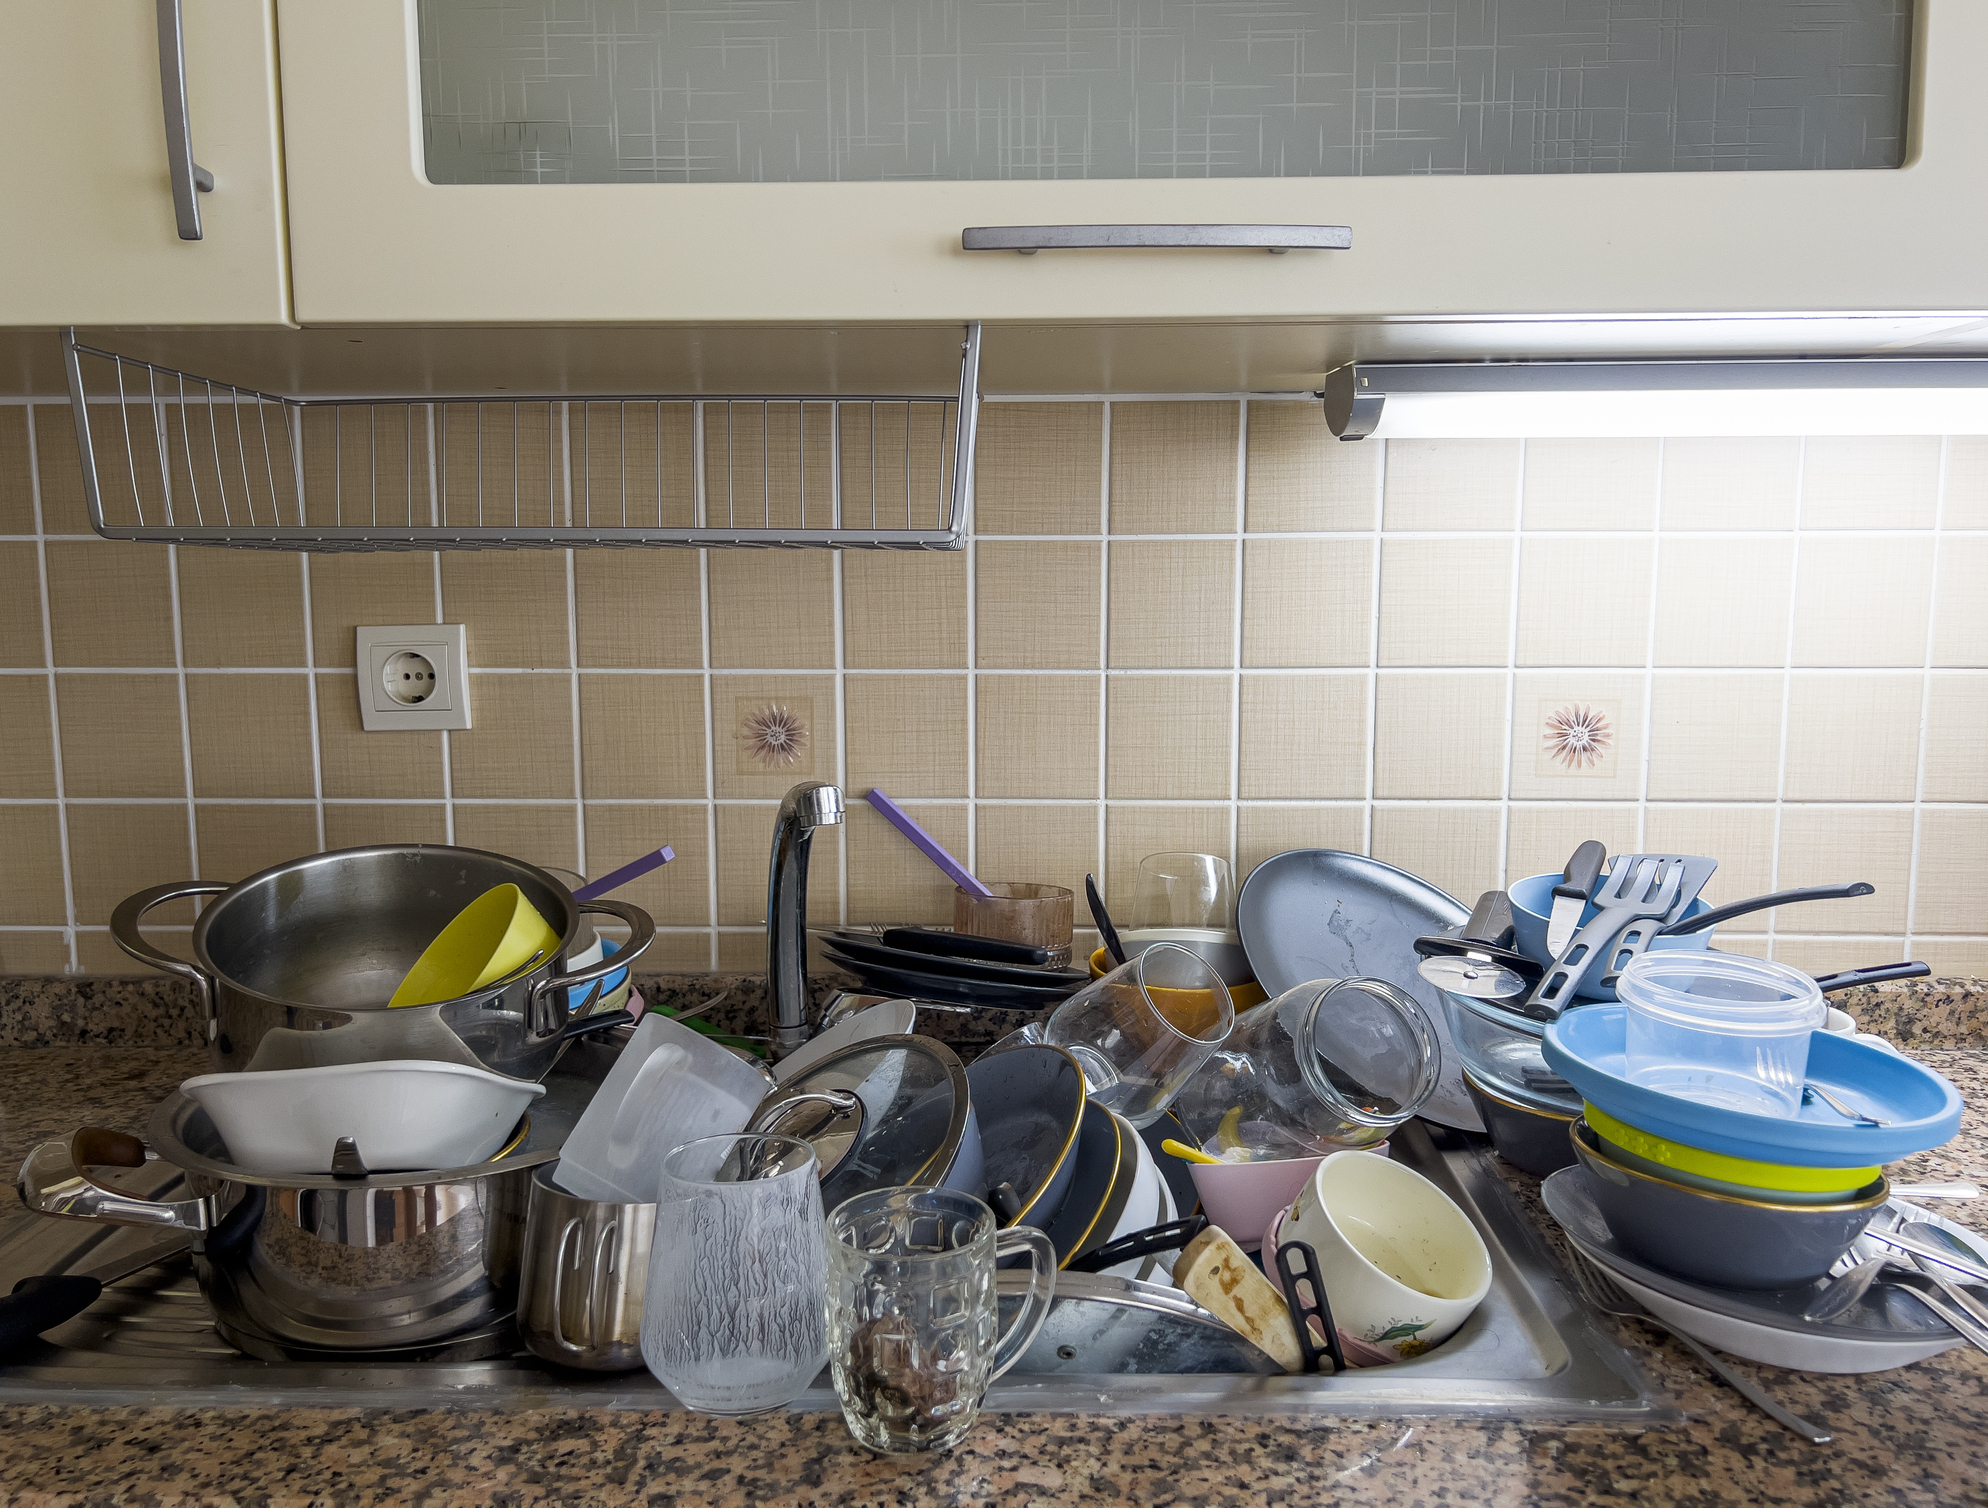 A cluttered kitchen sink piled with various unwashed dishes and utensils